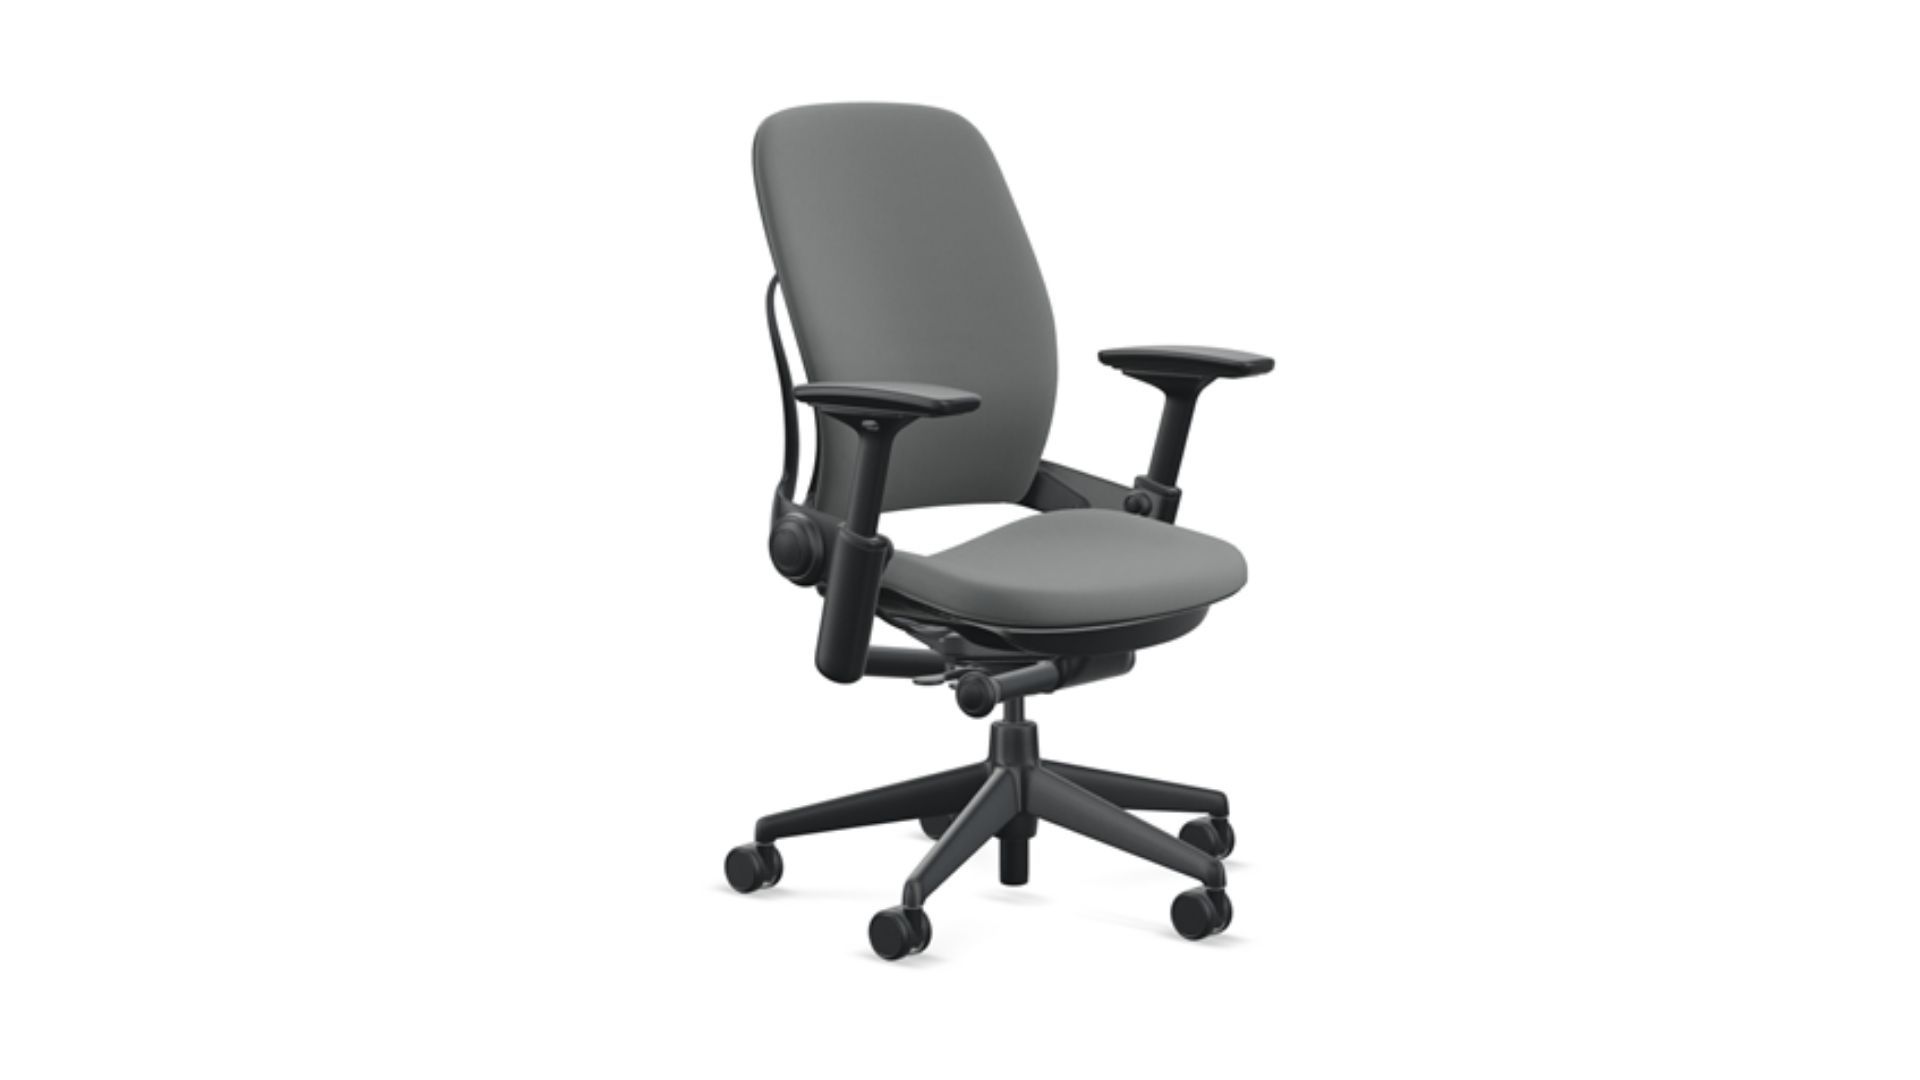 The high-performance ergonomic office chair model called Leap by Steelcase in grey, turned slightly to the side to show off its armrests.